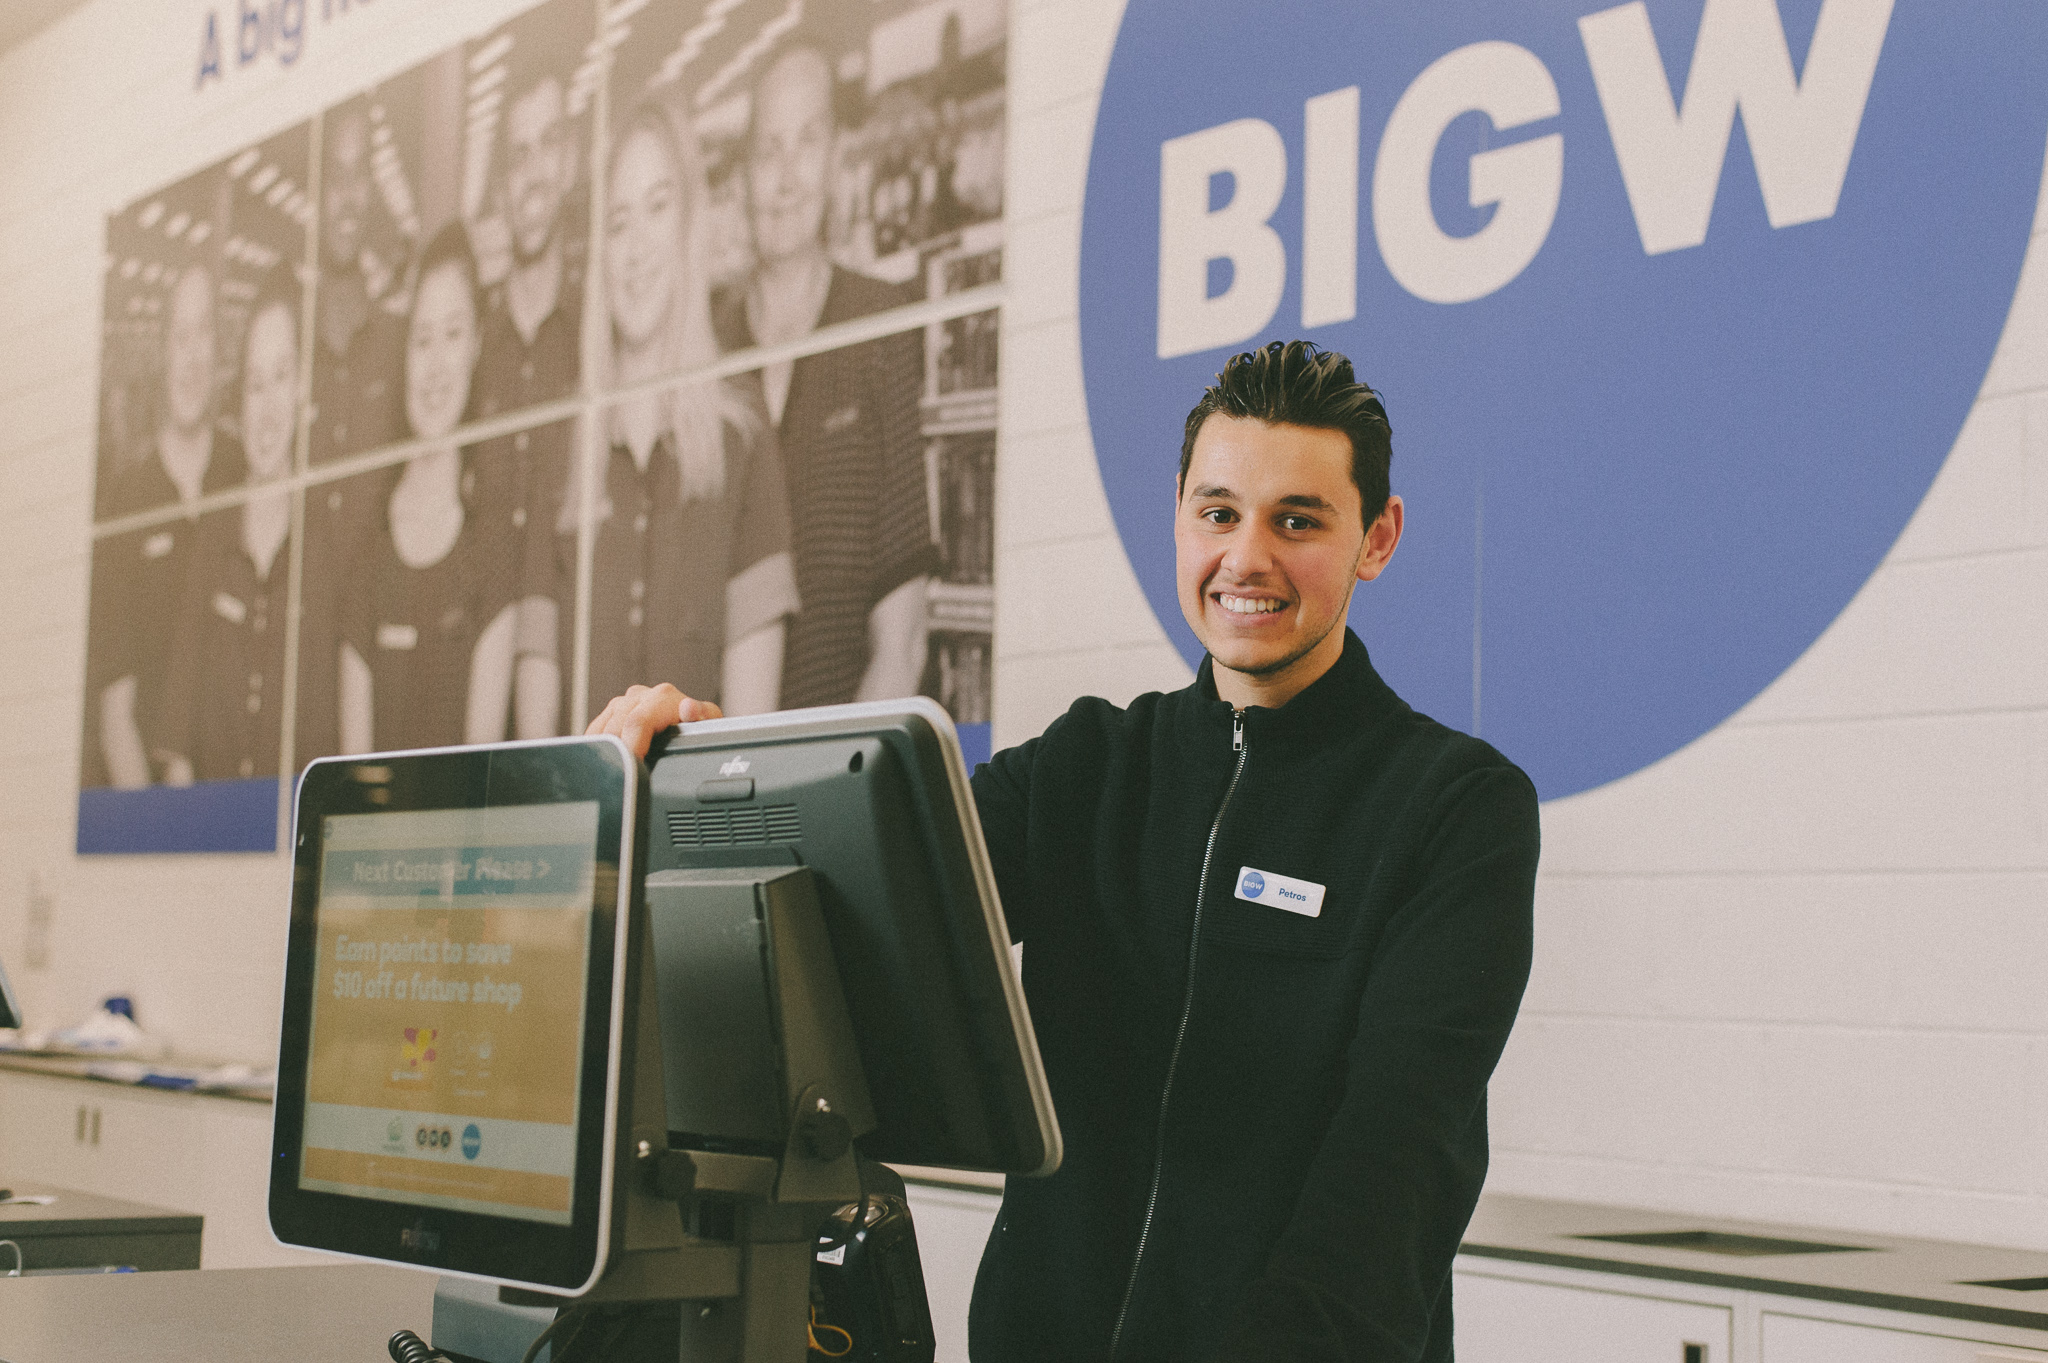 Petros standing at work in front of Big W sign at a cash register